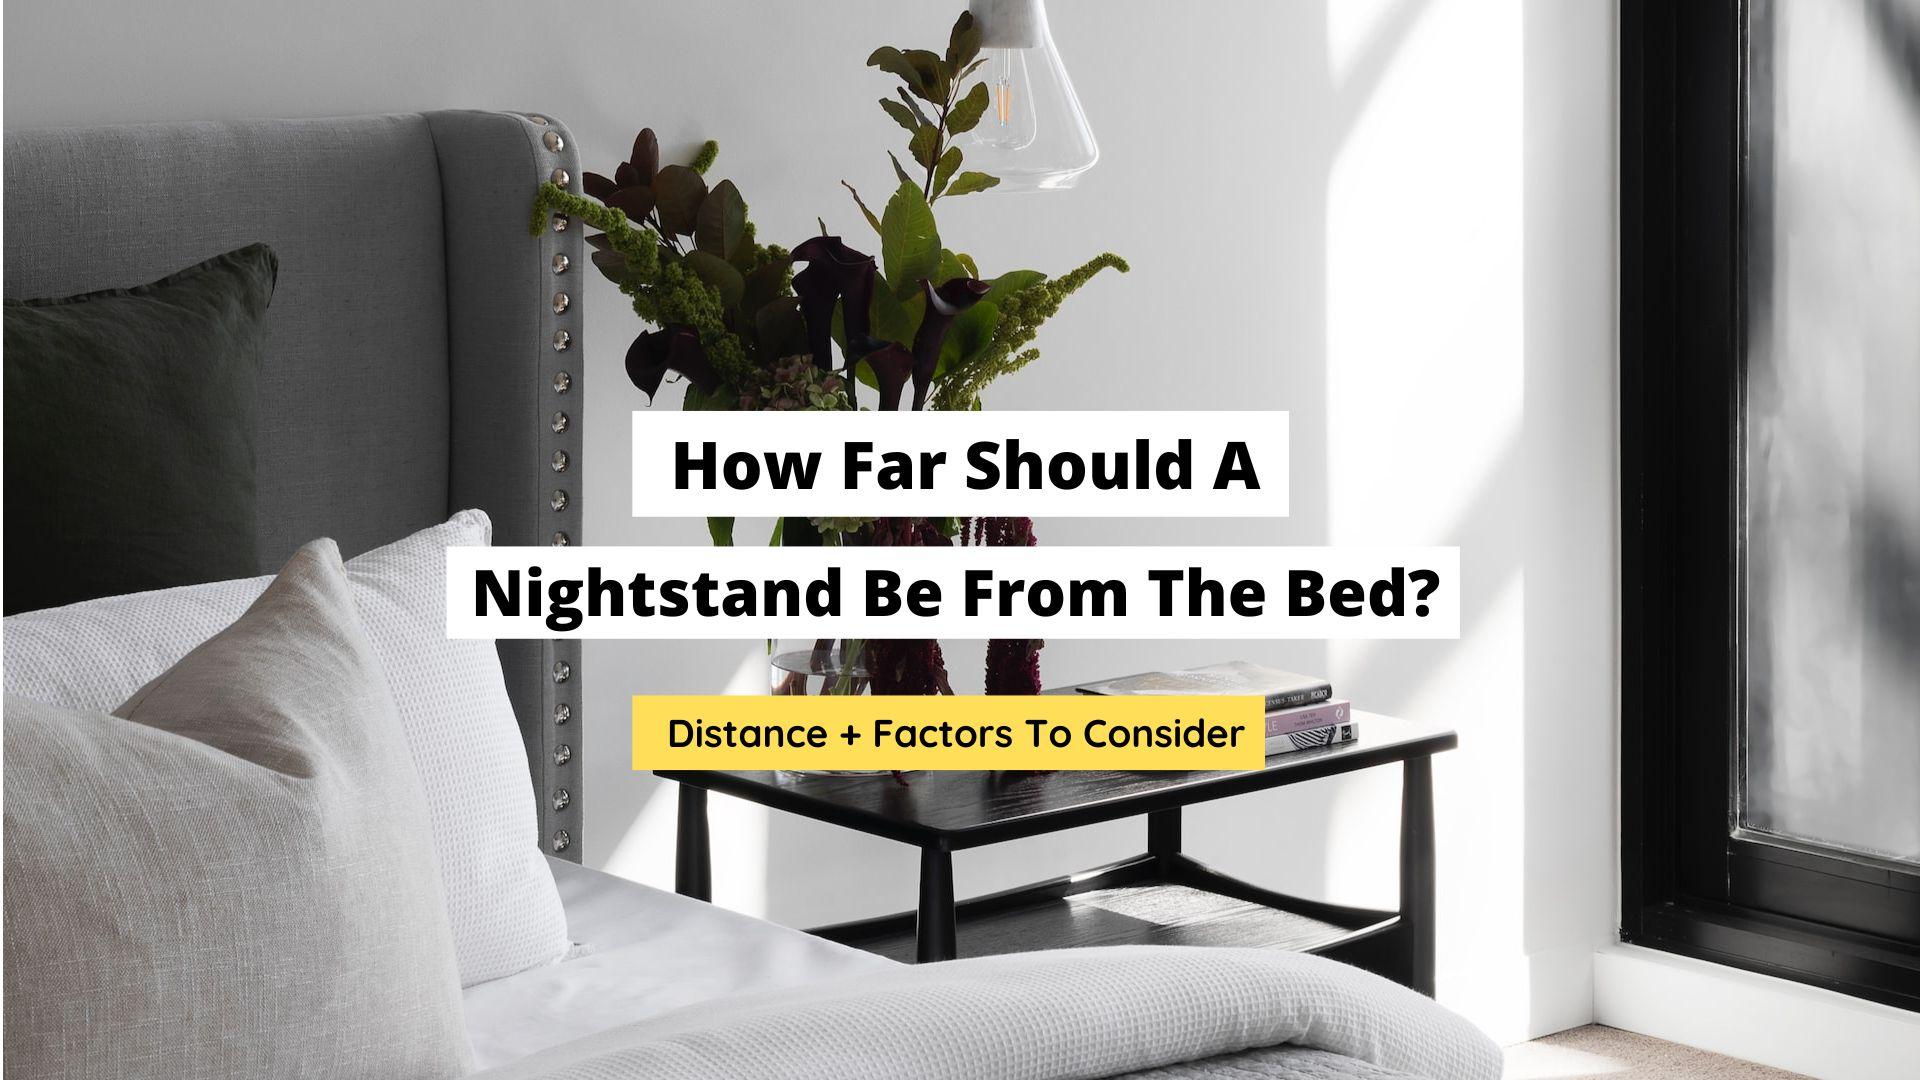 How Far Should A Nightstand Be From The Bed